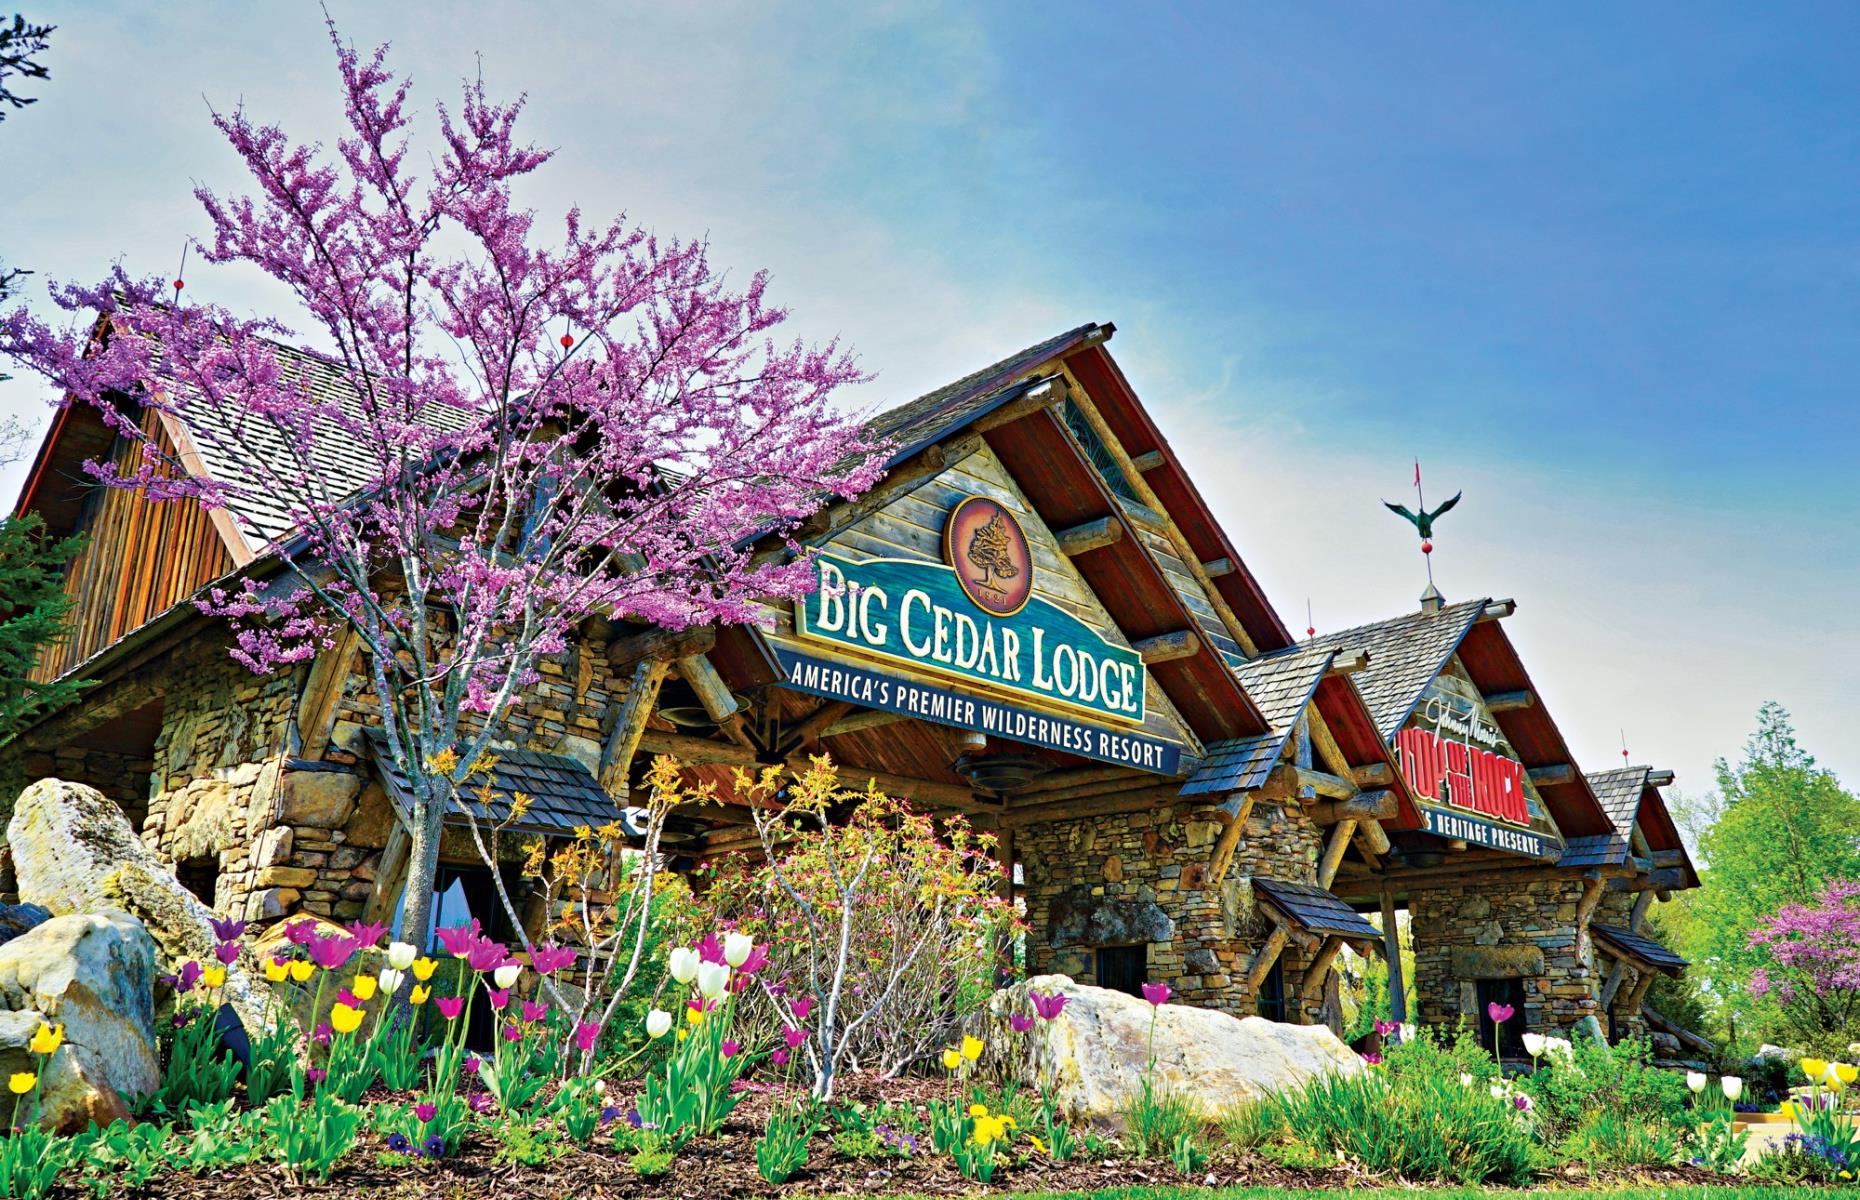 <p>Created by Johnny Morris, the founder of Bass Pro Shops, <a href="https://bigcedar.com/">Big Cedar Lodge</a> offers the ultimate Ozark Mountains experience. The lodge itself sees rustic country charm coupled with modern bells and whistles, as well as a rejuvenating spa and both fine and casual dining options. But Big Cedar’s true draw is the recreational thrills of the Ozarks, with golf, fishing, shooting, hiking, go-karting and much more on the table.</p>  <p><strong><a href="https://www.loveexploring.com/galleries/117173/secrets-of-the-ozarks-revealed">Check out these fascinating facts about the Ozarks</a></strong></p>